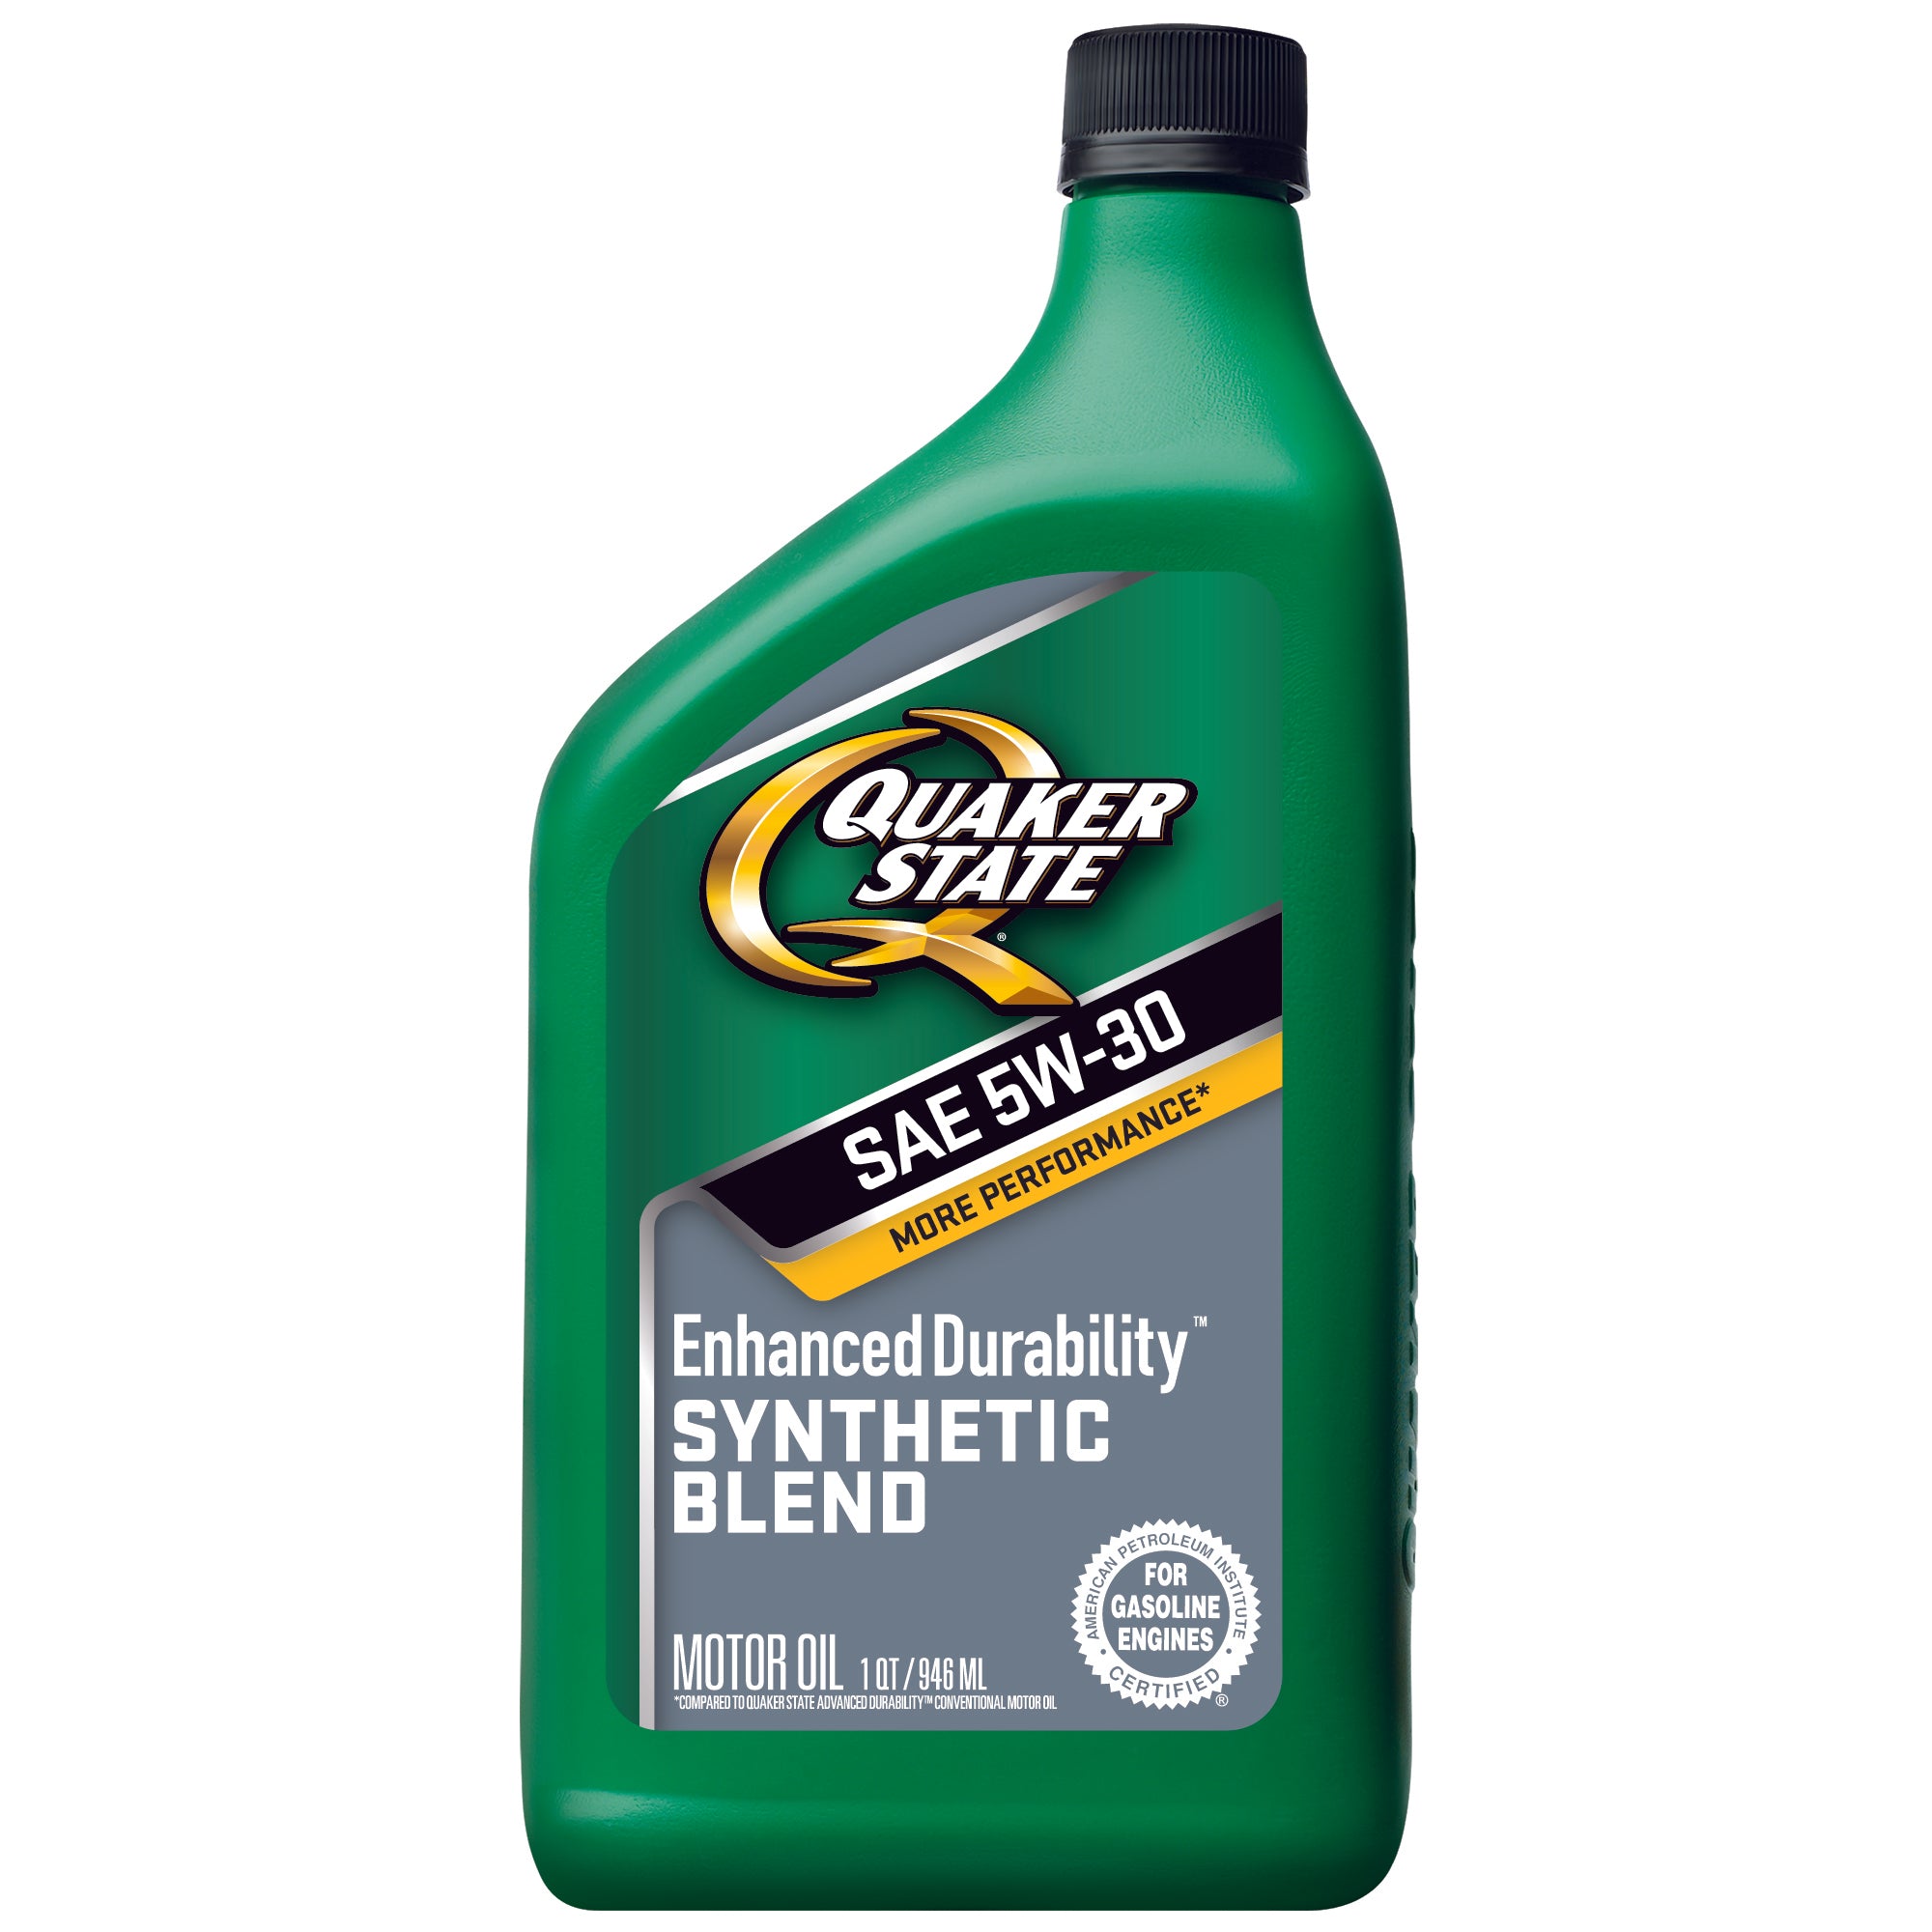 Quaker State 5W 30 Synthetic Blend Motor Oil DEXOS 1 Approved Case of 61 qts